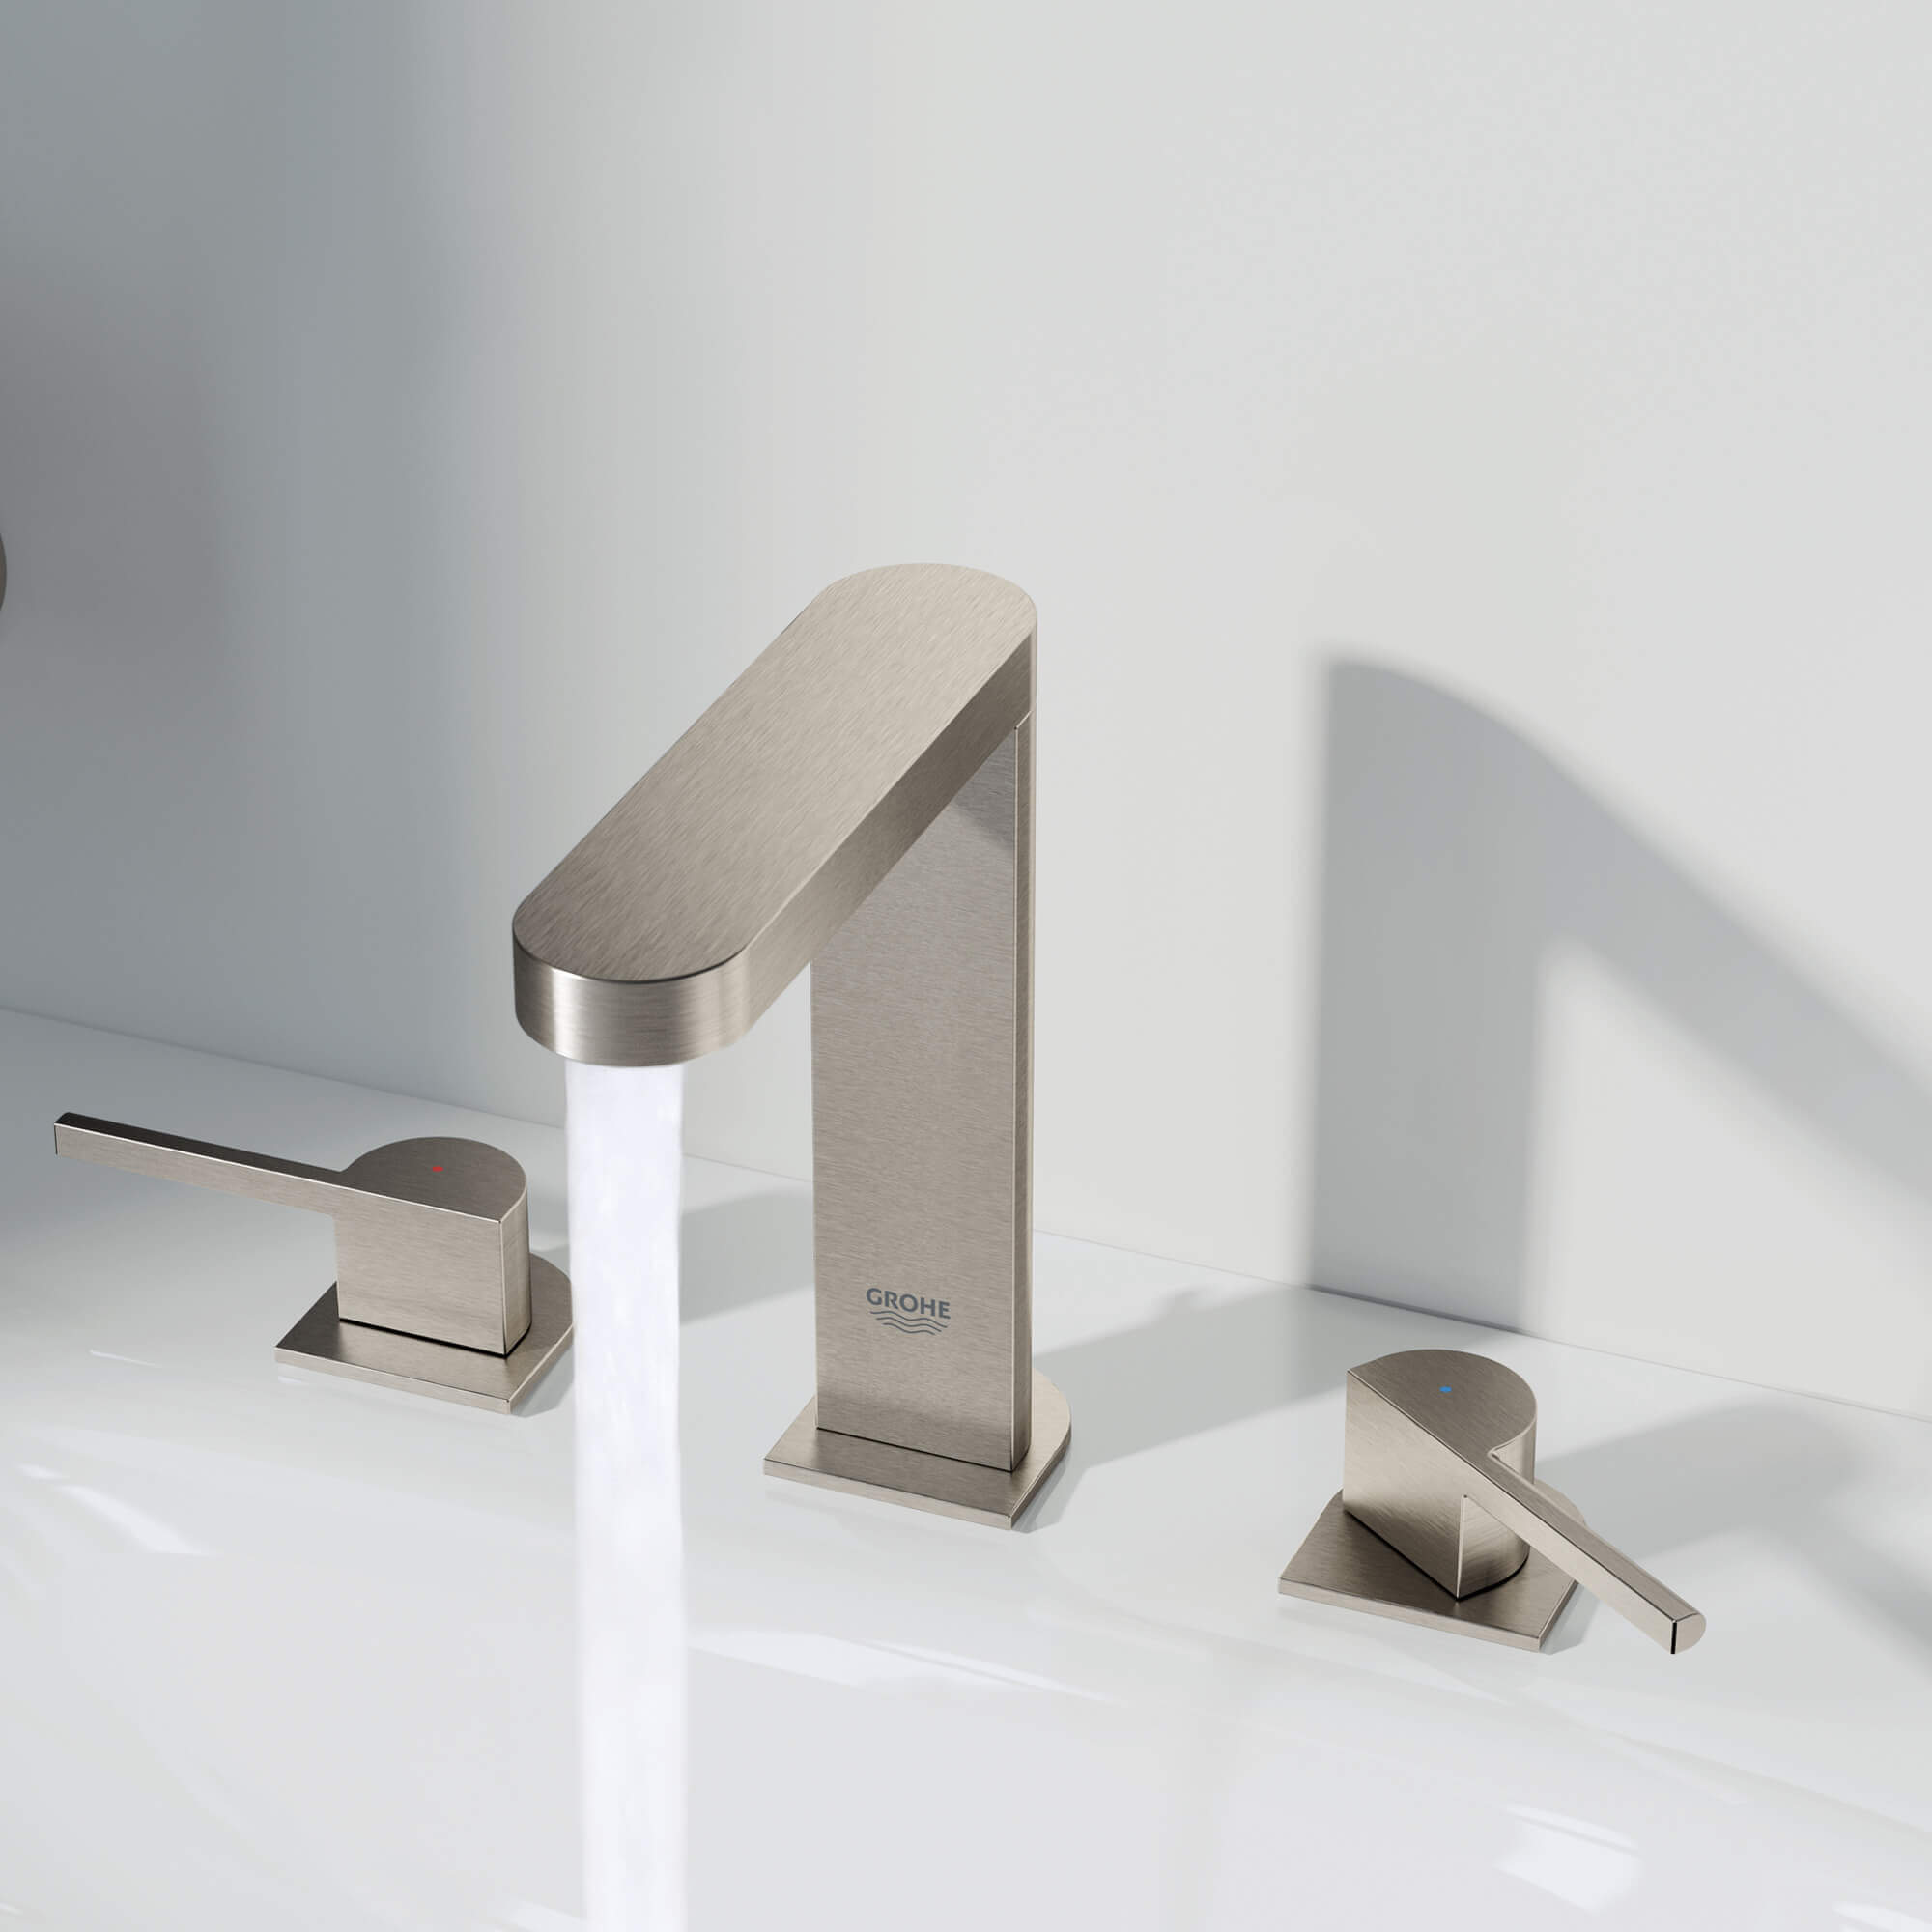 GROHE Plus Widespread Faucet with Running Water